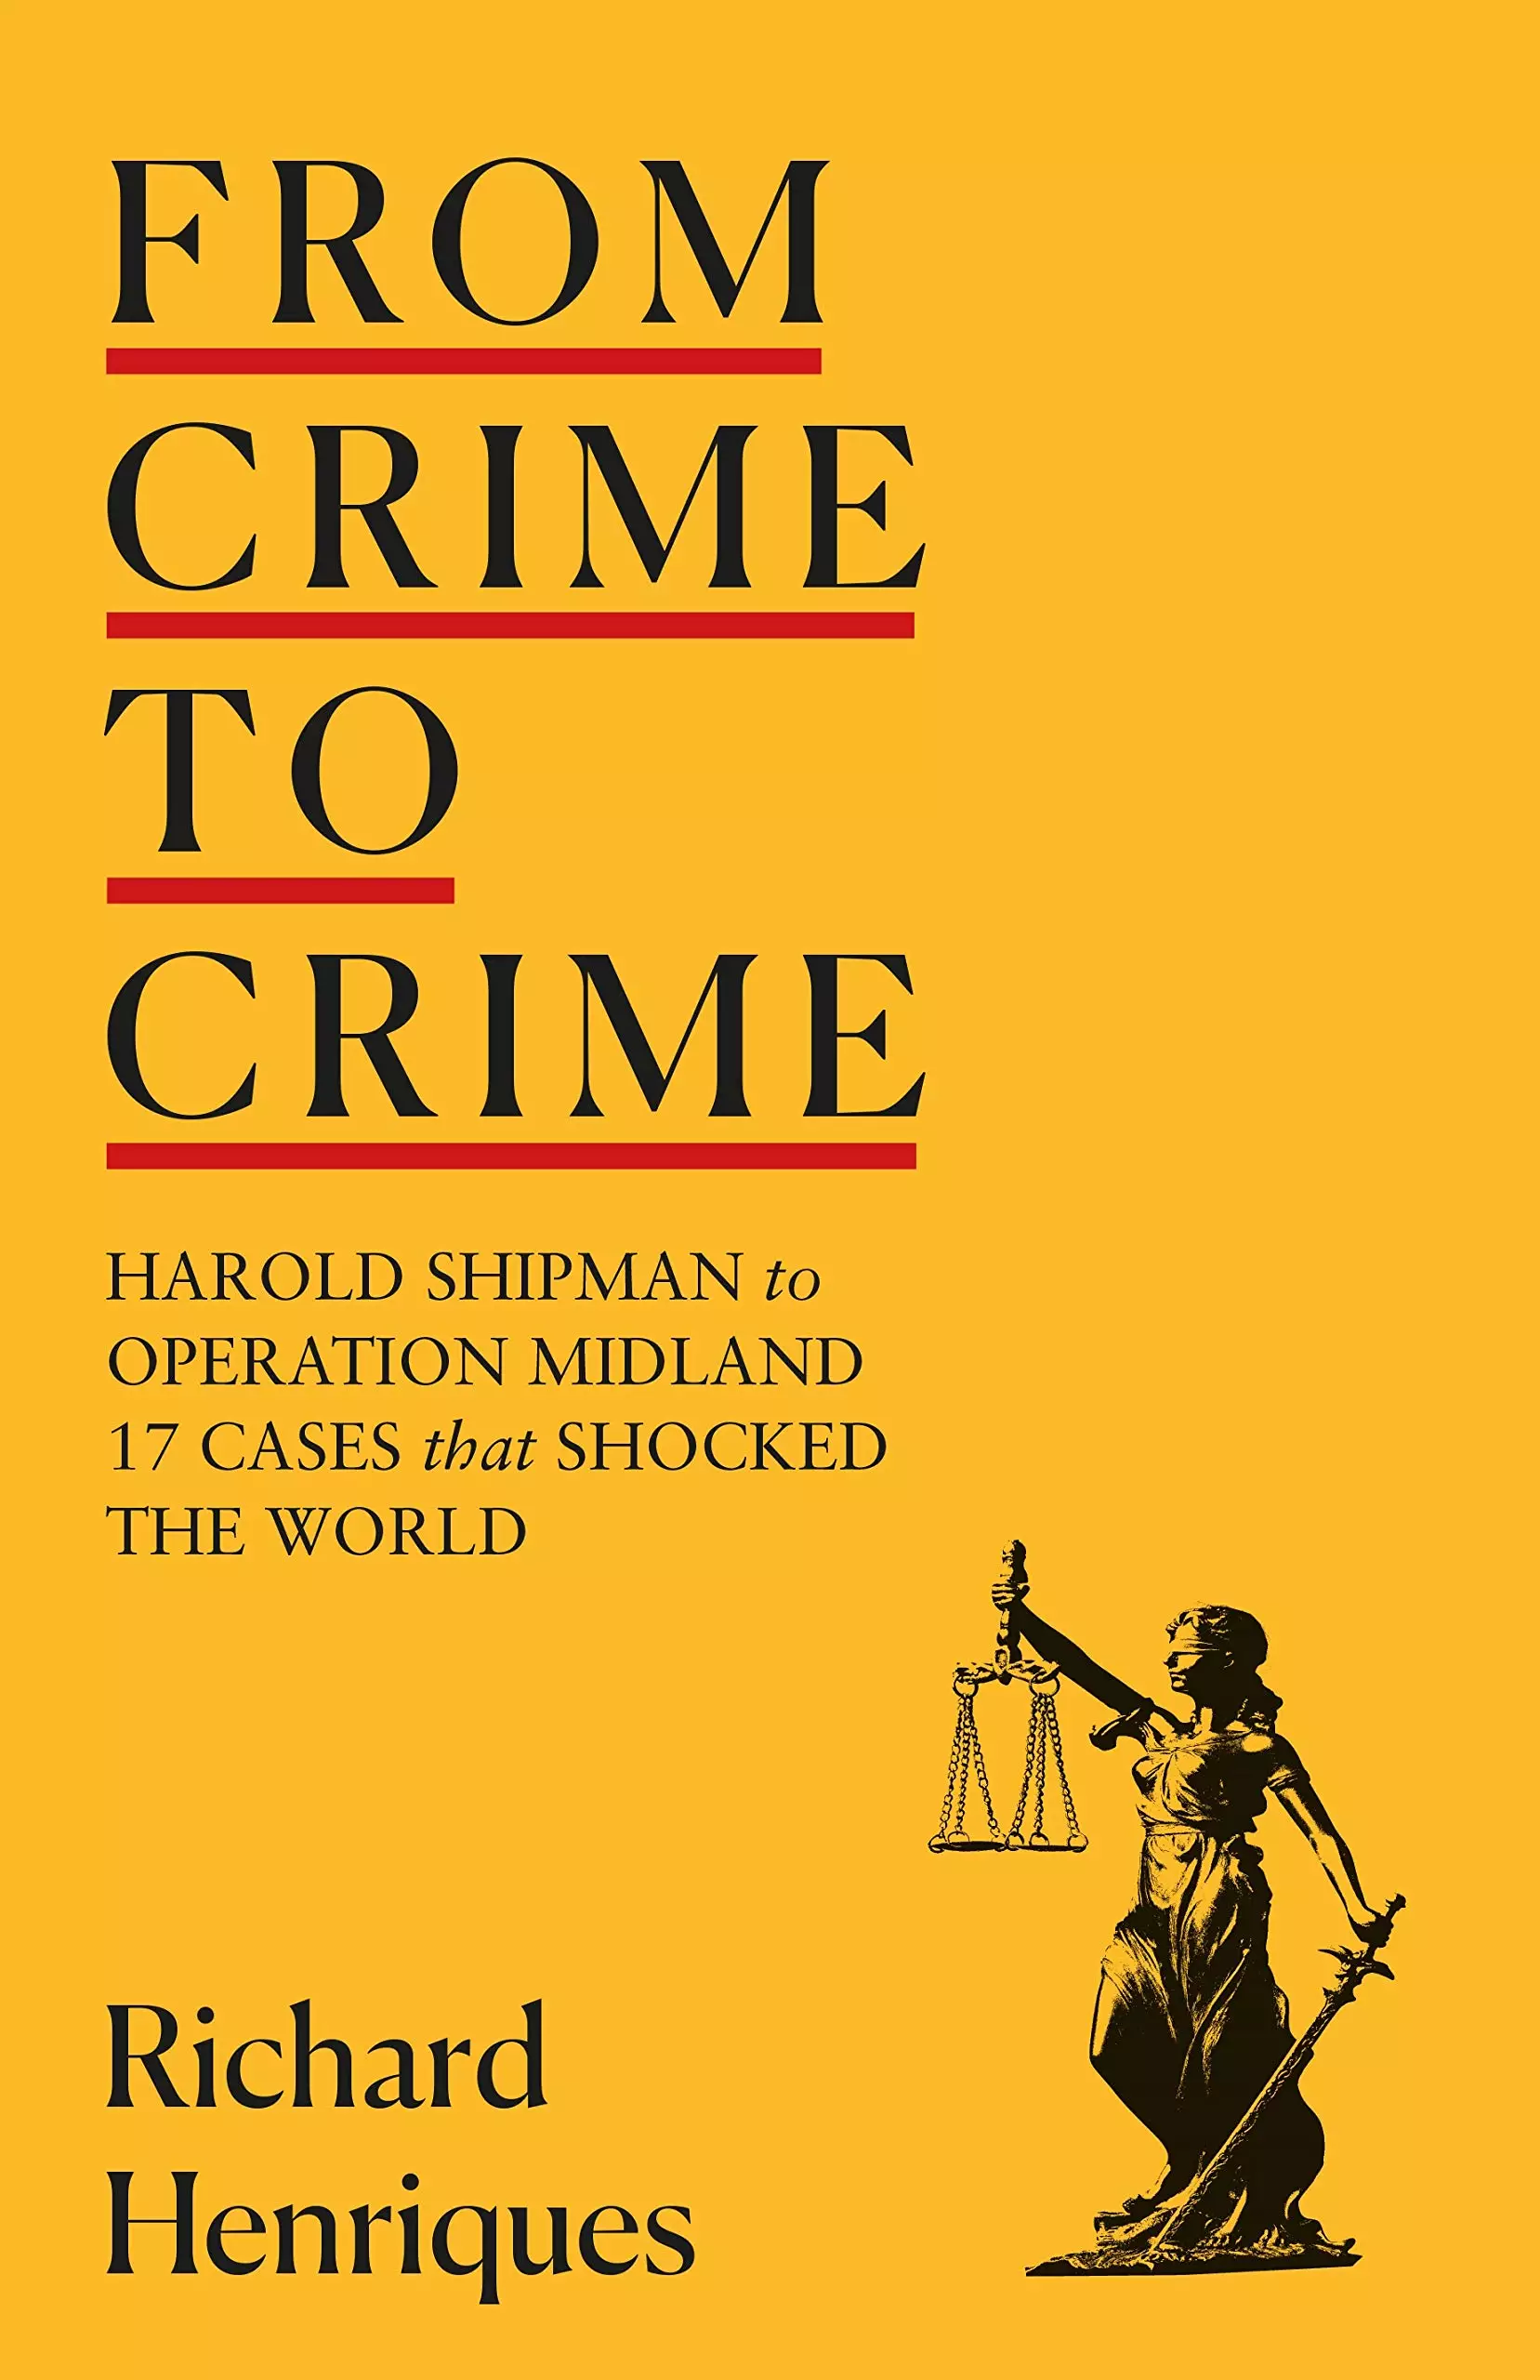 From Crime to Crime - Sir Richard Henriques book.